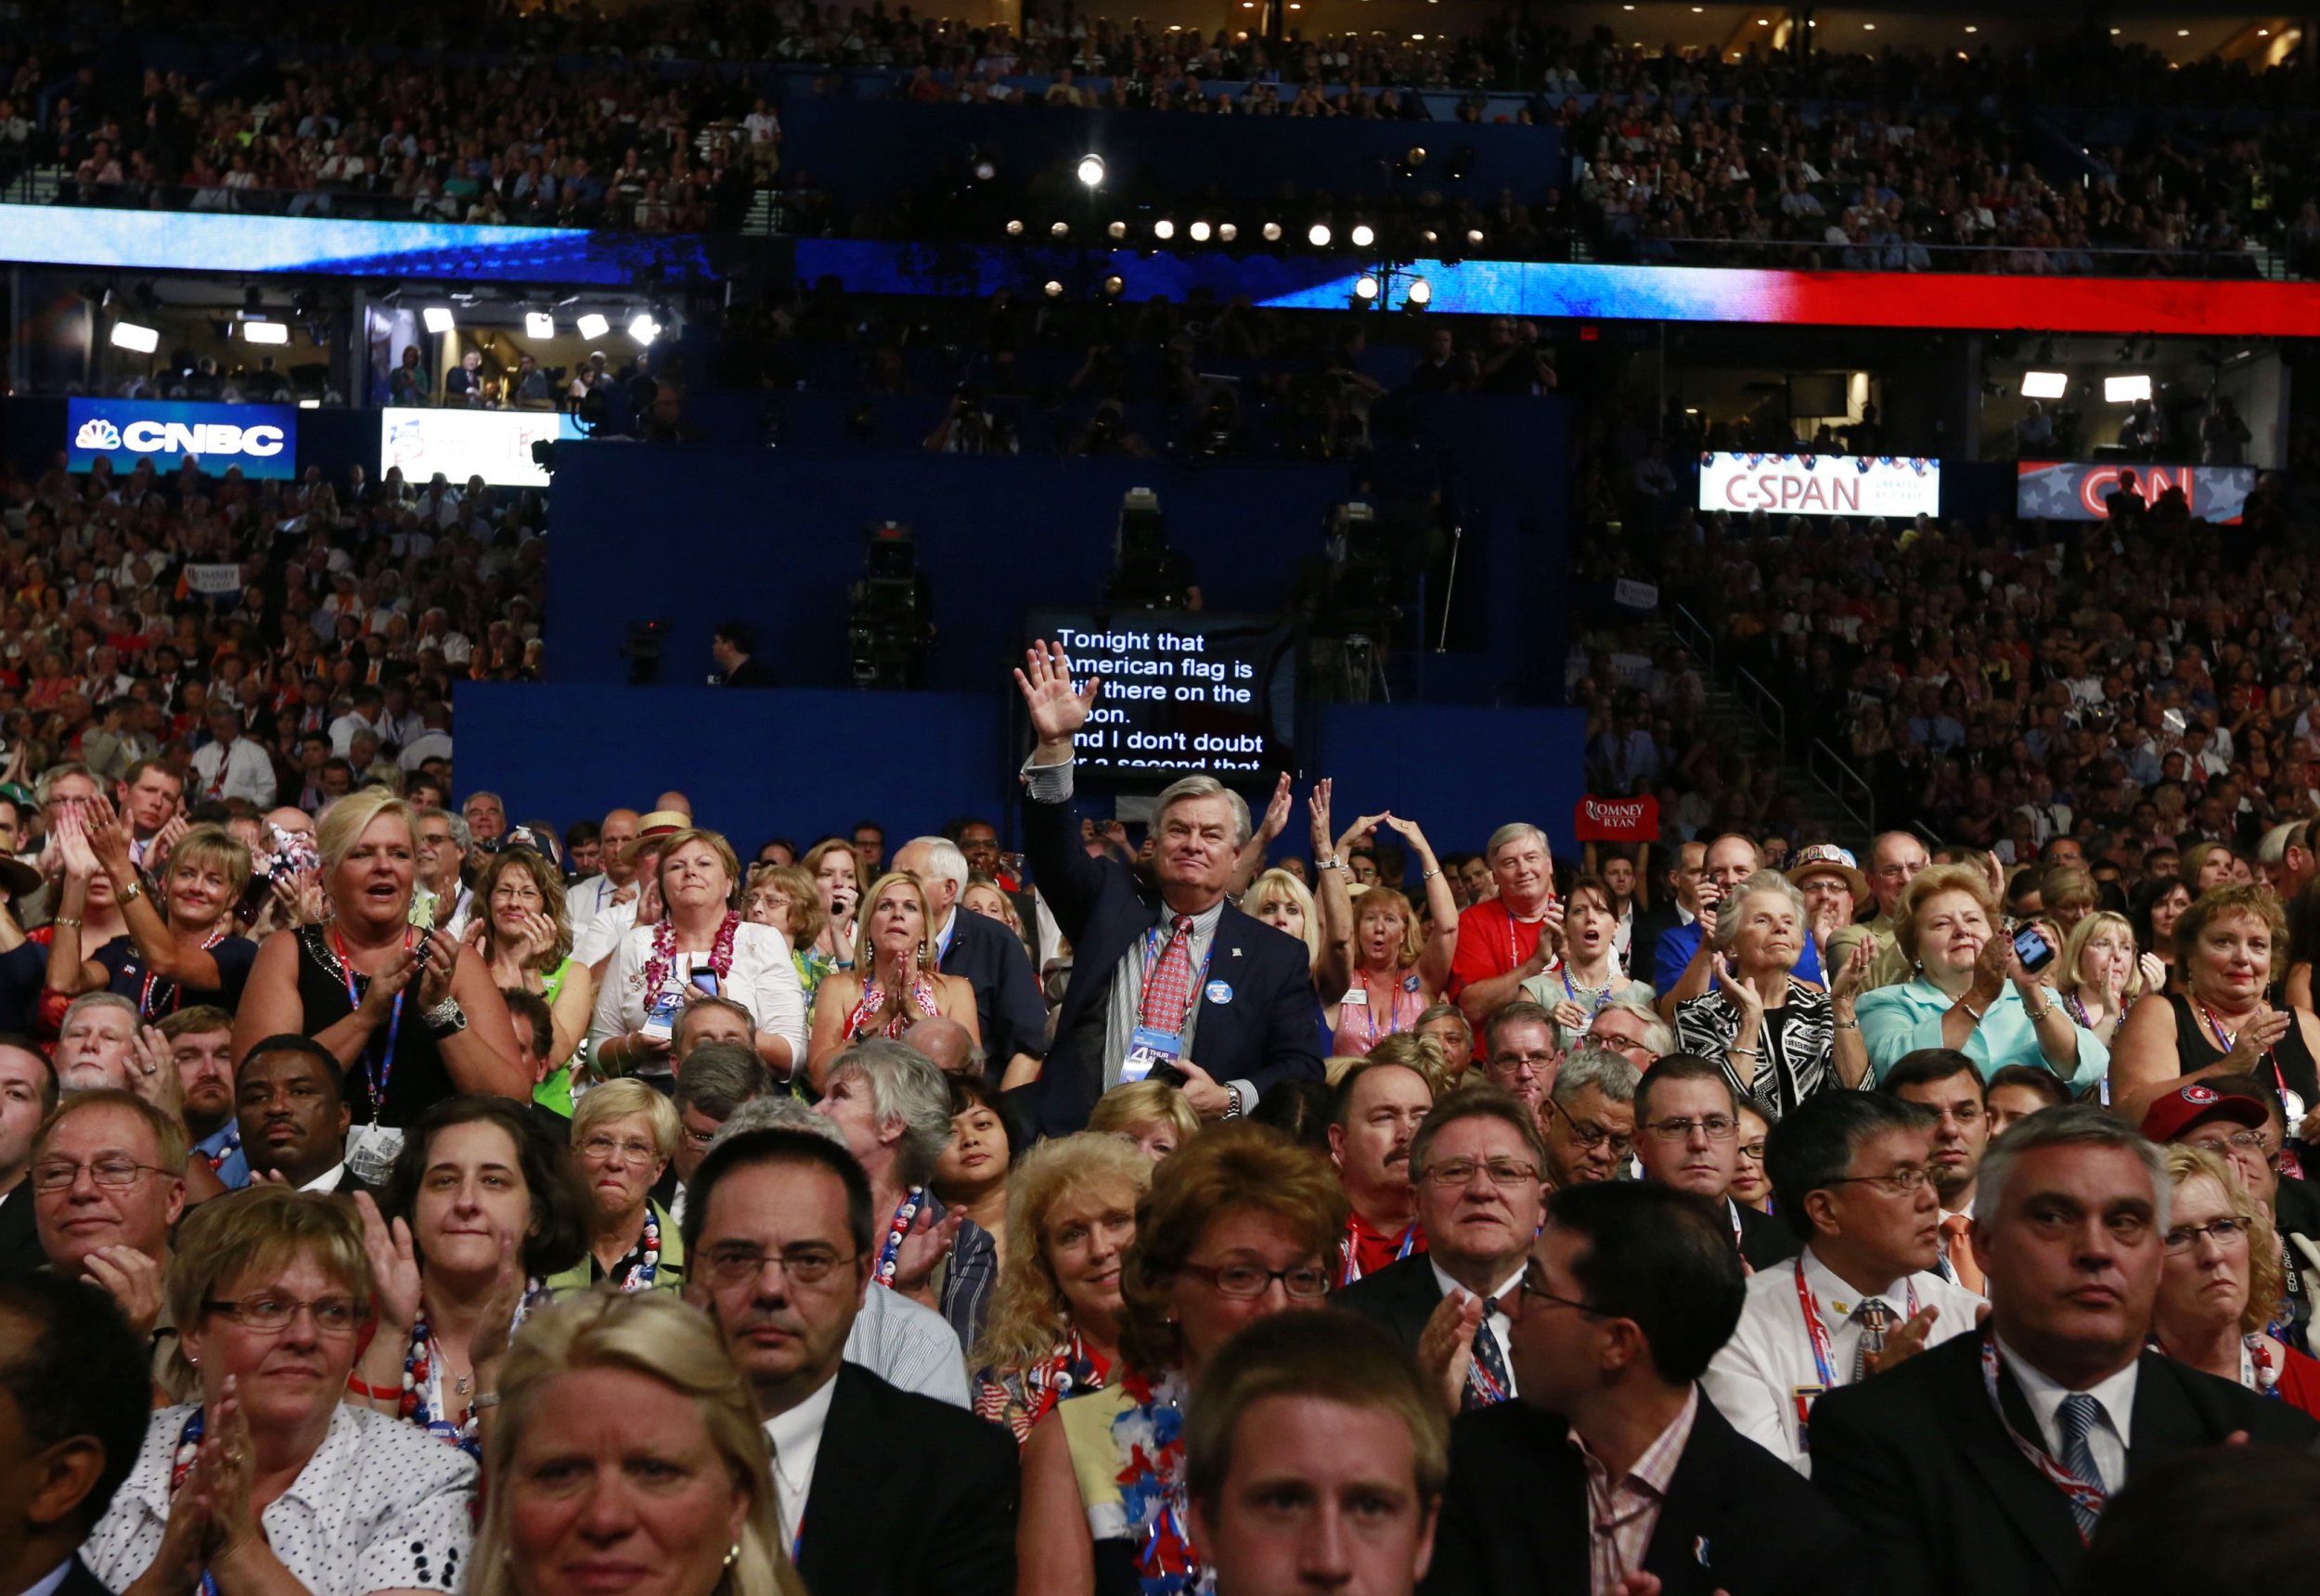 How To Get Tickets To The Republican National Convention Is RNC Event